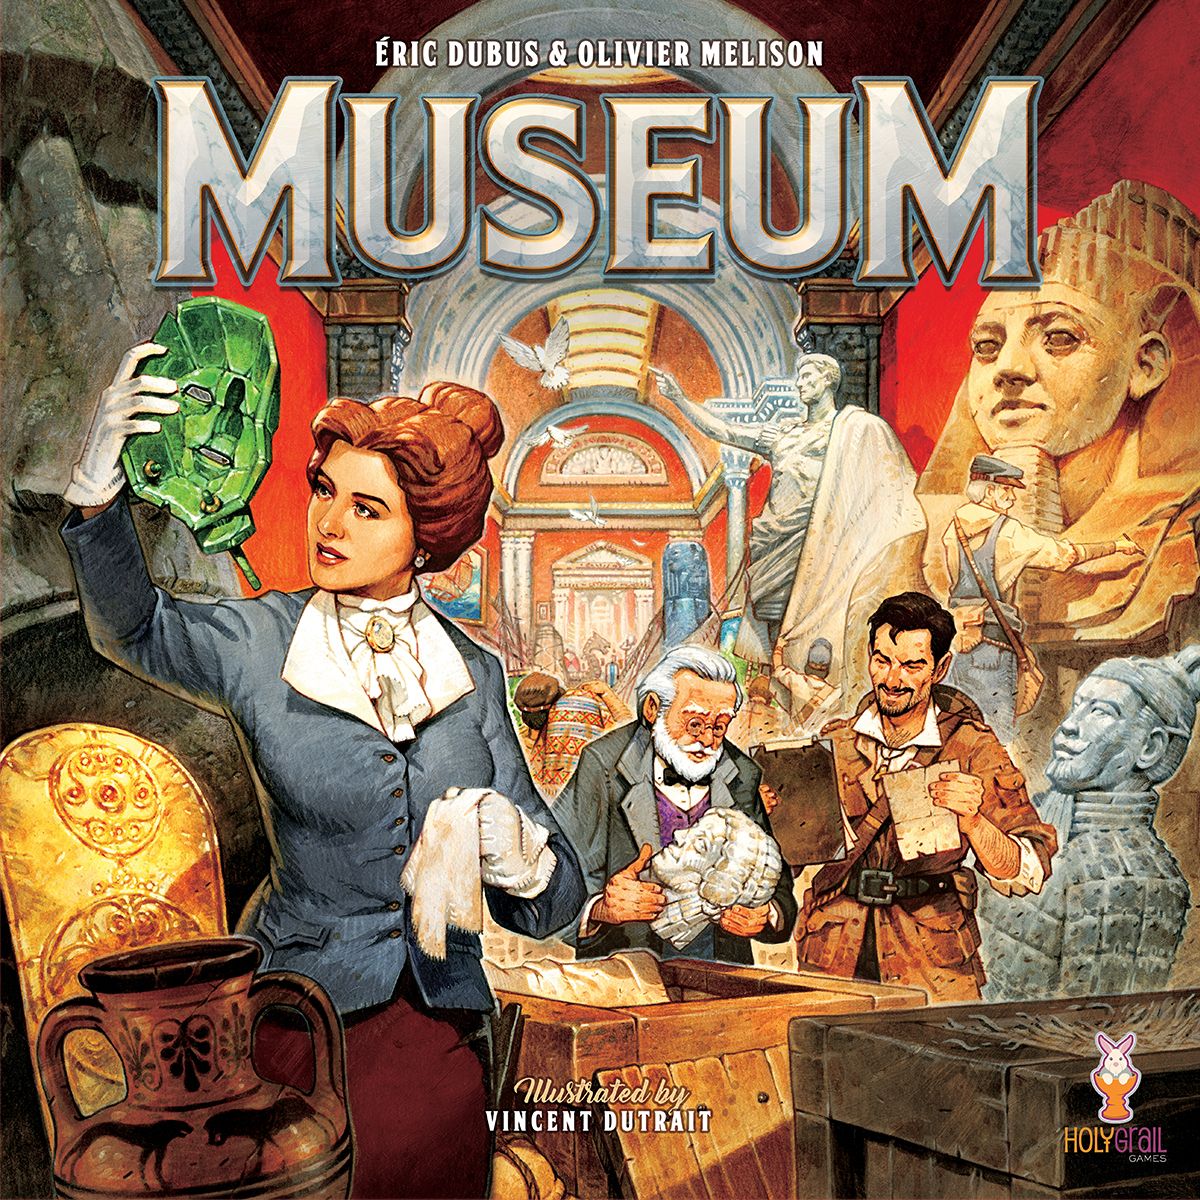 Cover art for the tabletop game Museum, showing curators opening historical artifacts